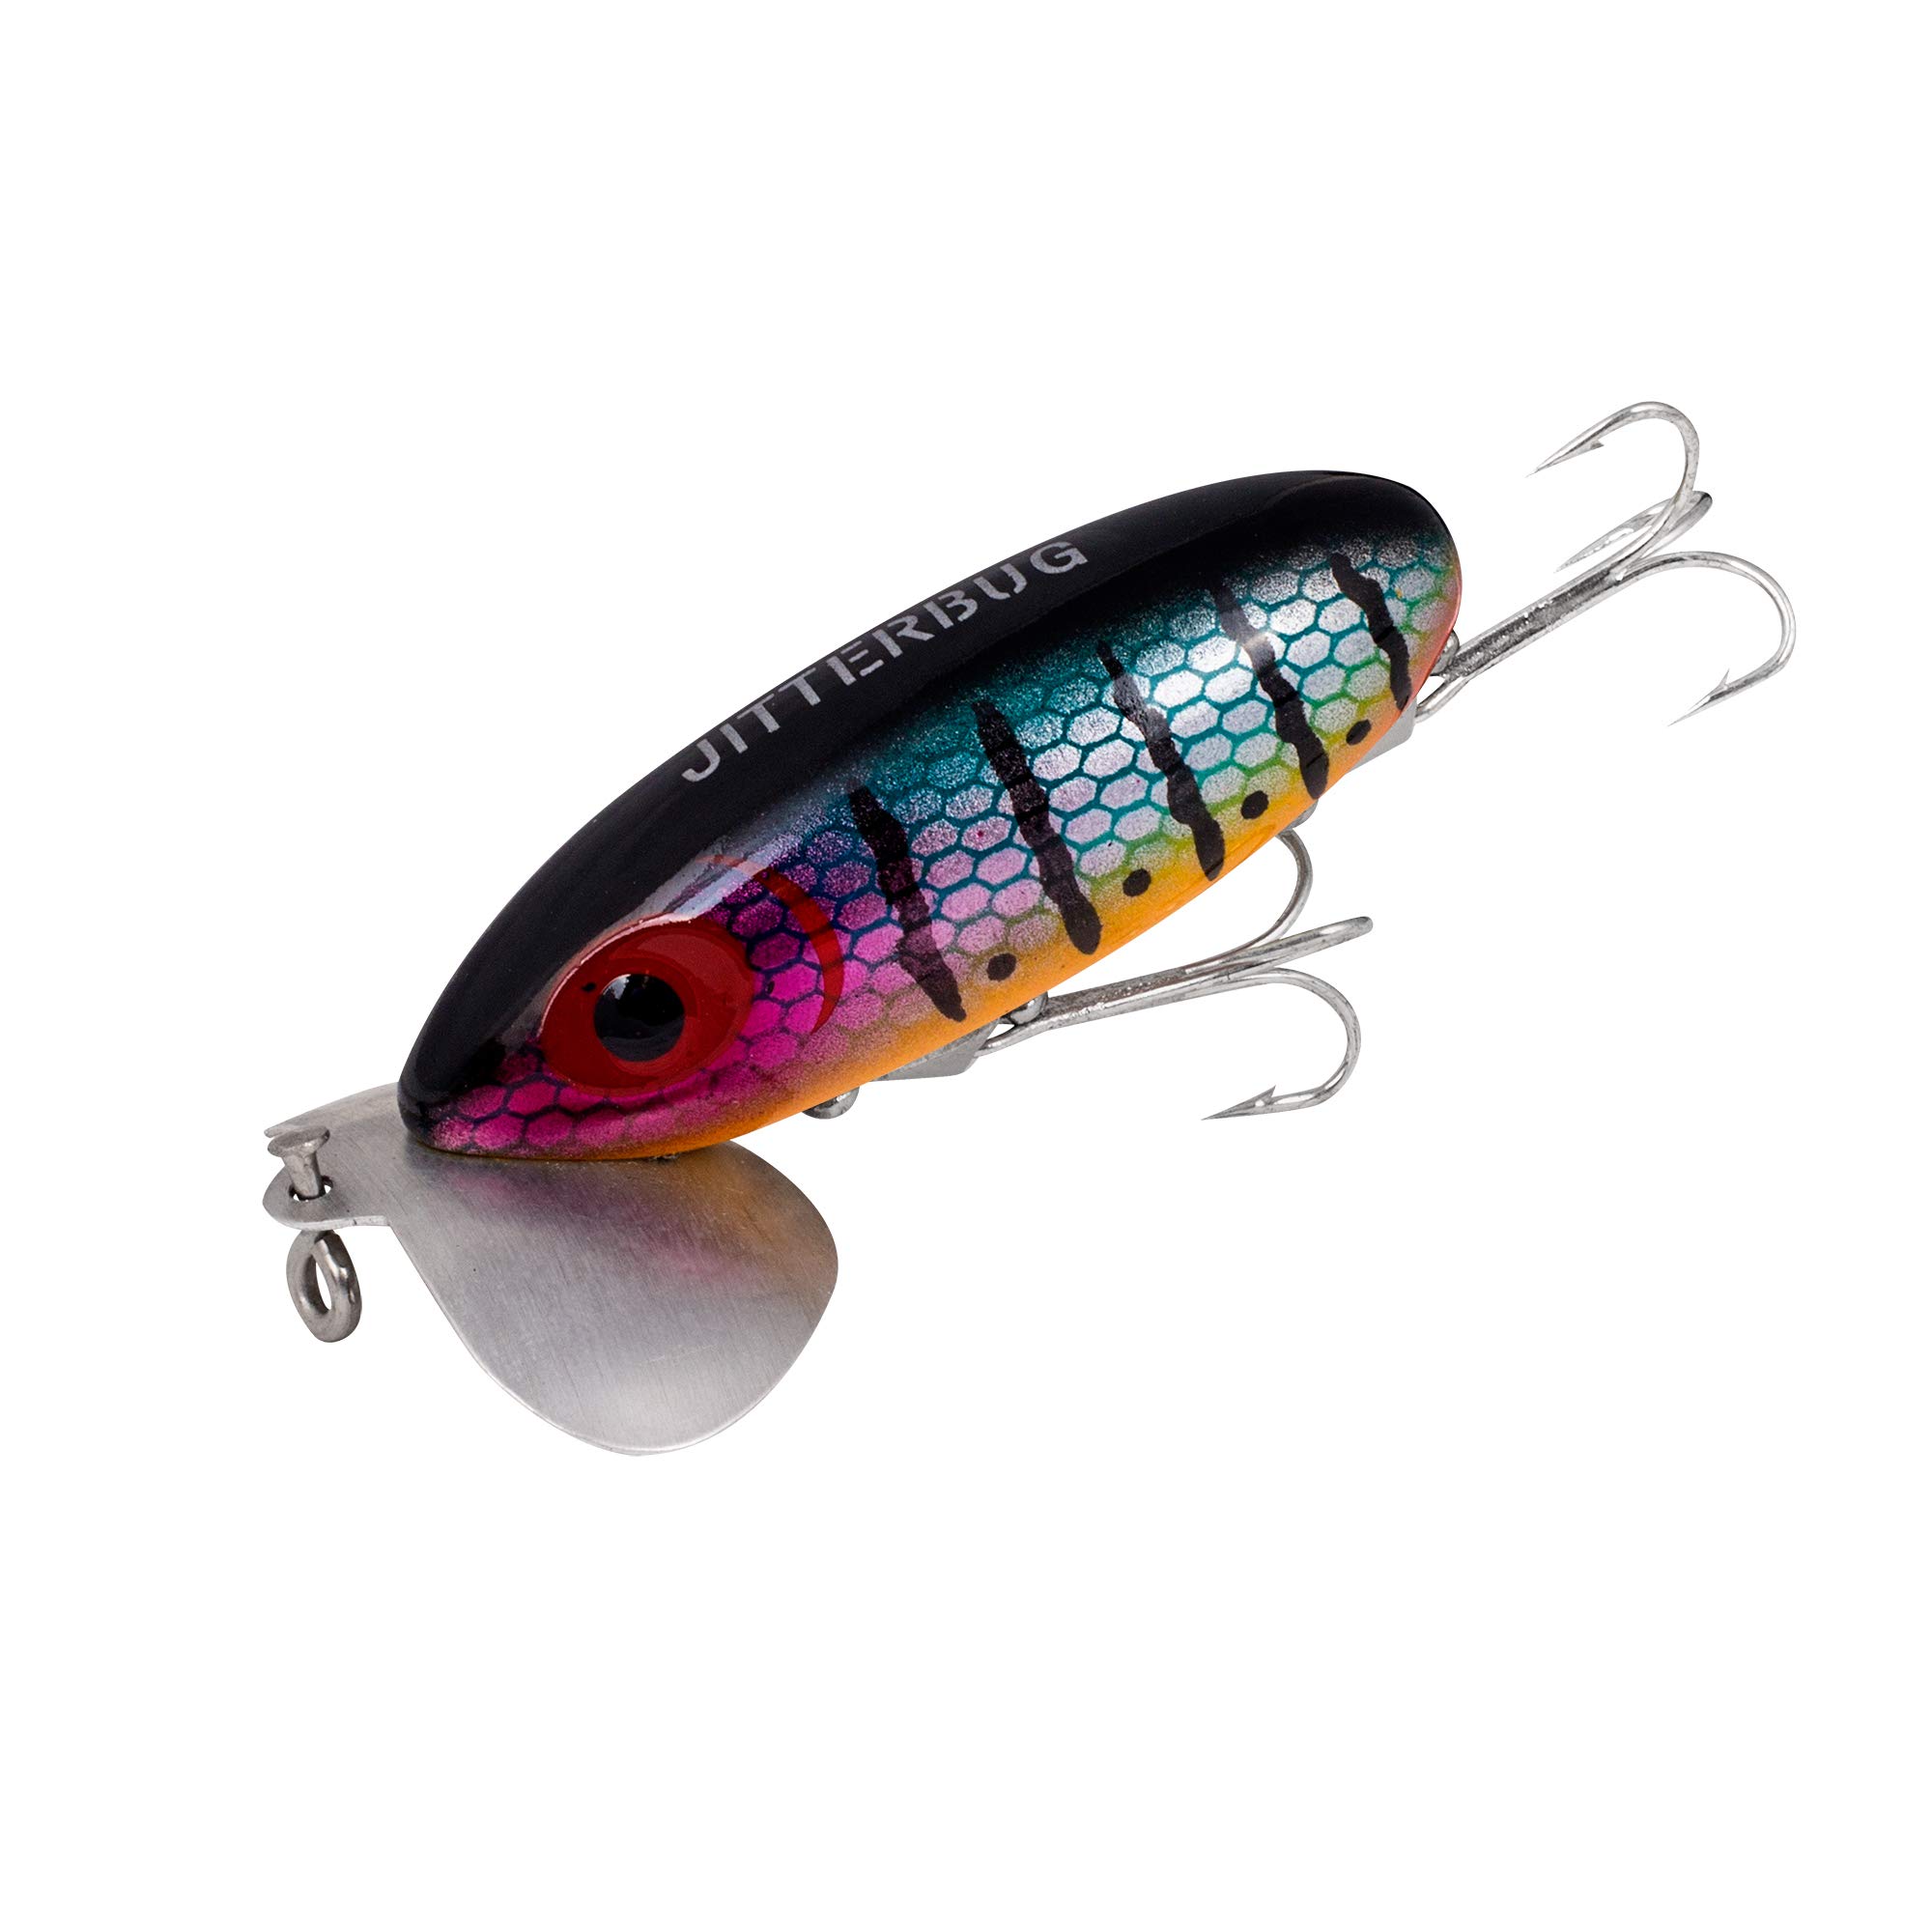  Arbogast Jitterbug Topwater Bass Fishing Lure - Excellent  For Night Fishing, Yellow, G600